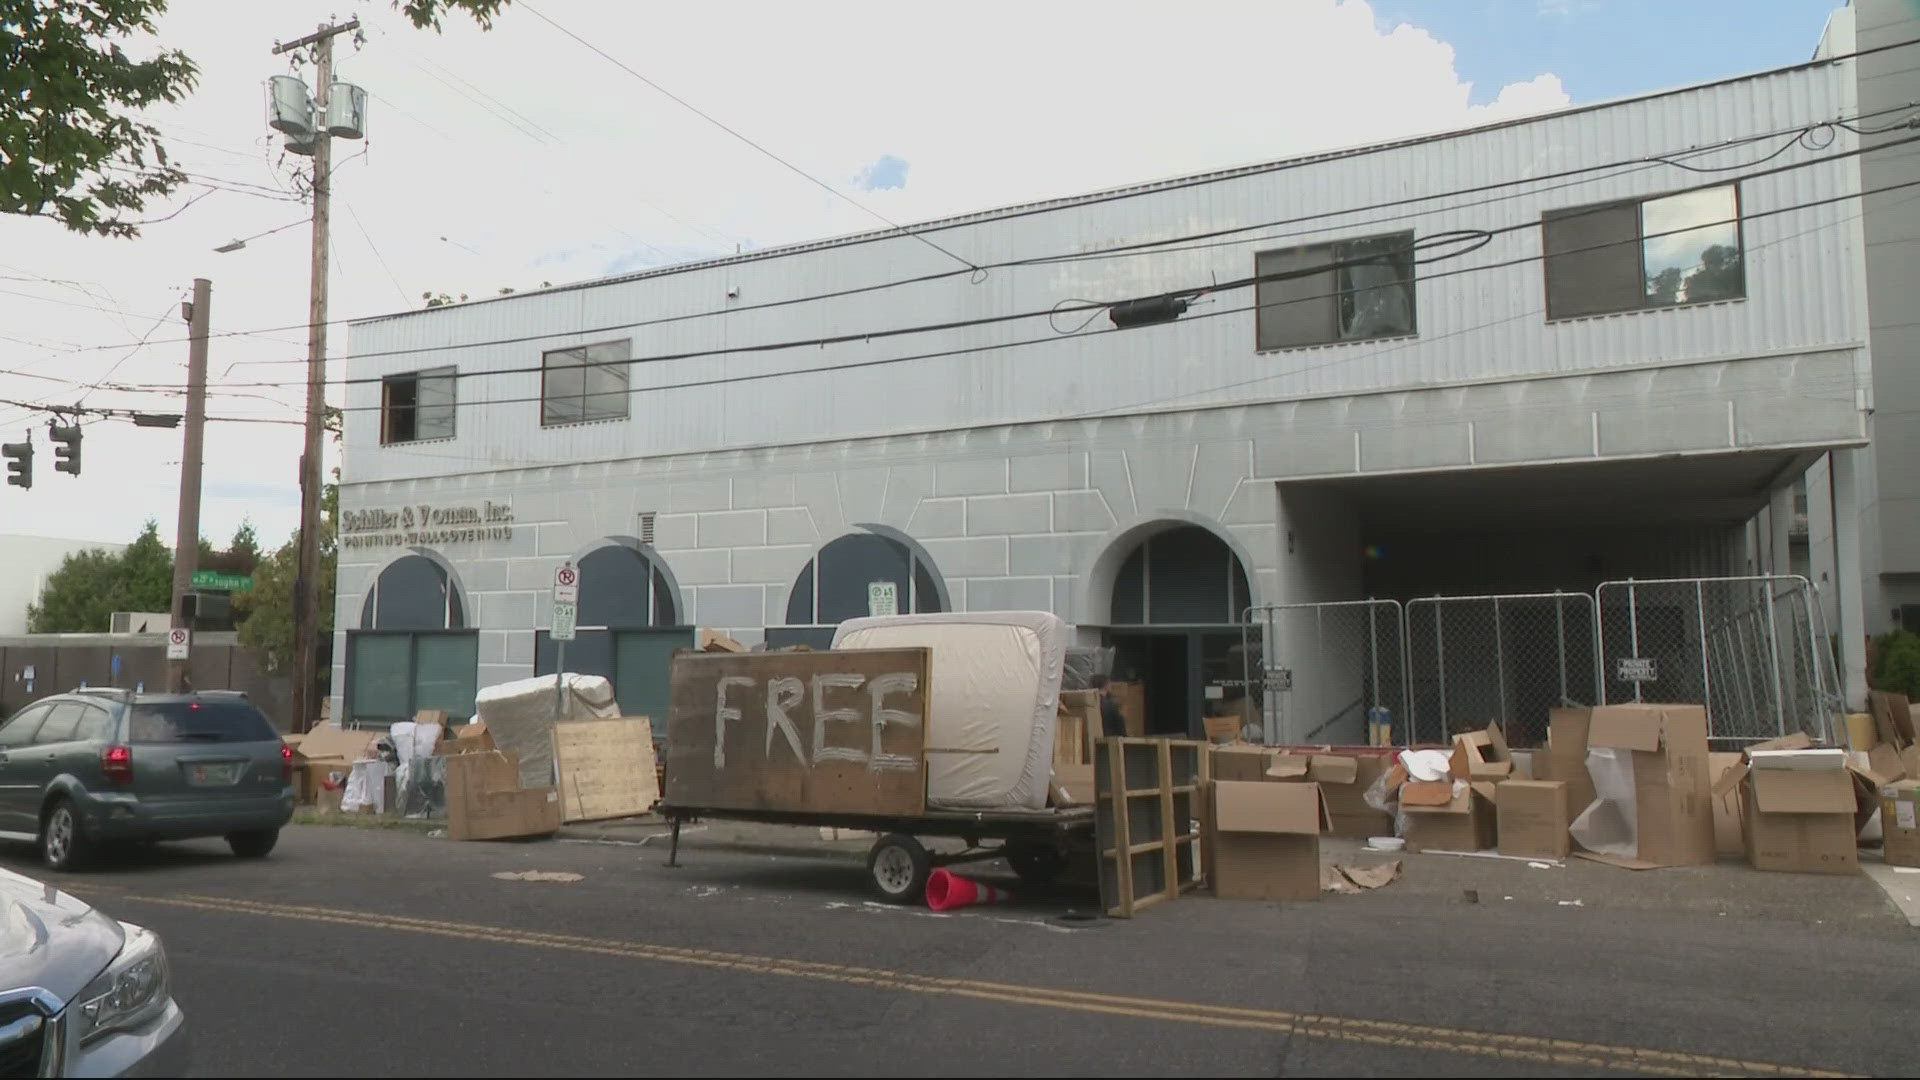 People packed the warehouse, taking items they thought were free. But it wasn't the property owner who posted the 'free' sign or allowed people to go in.